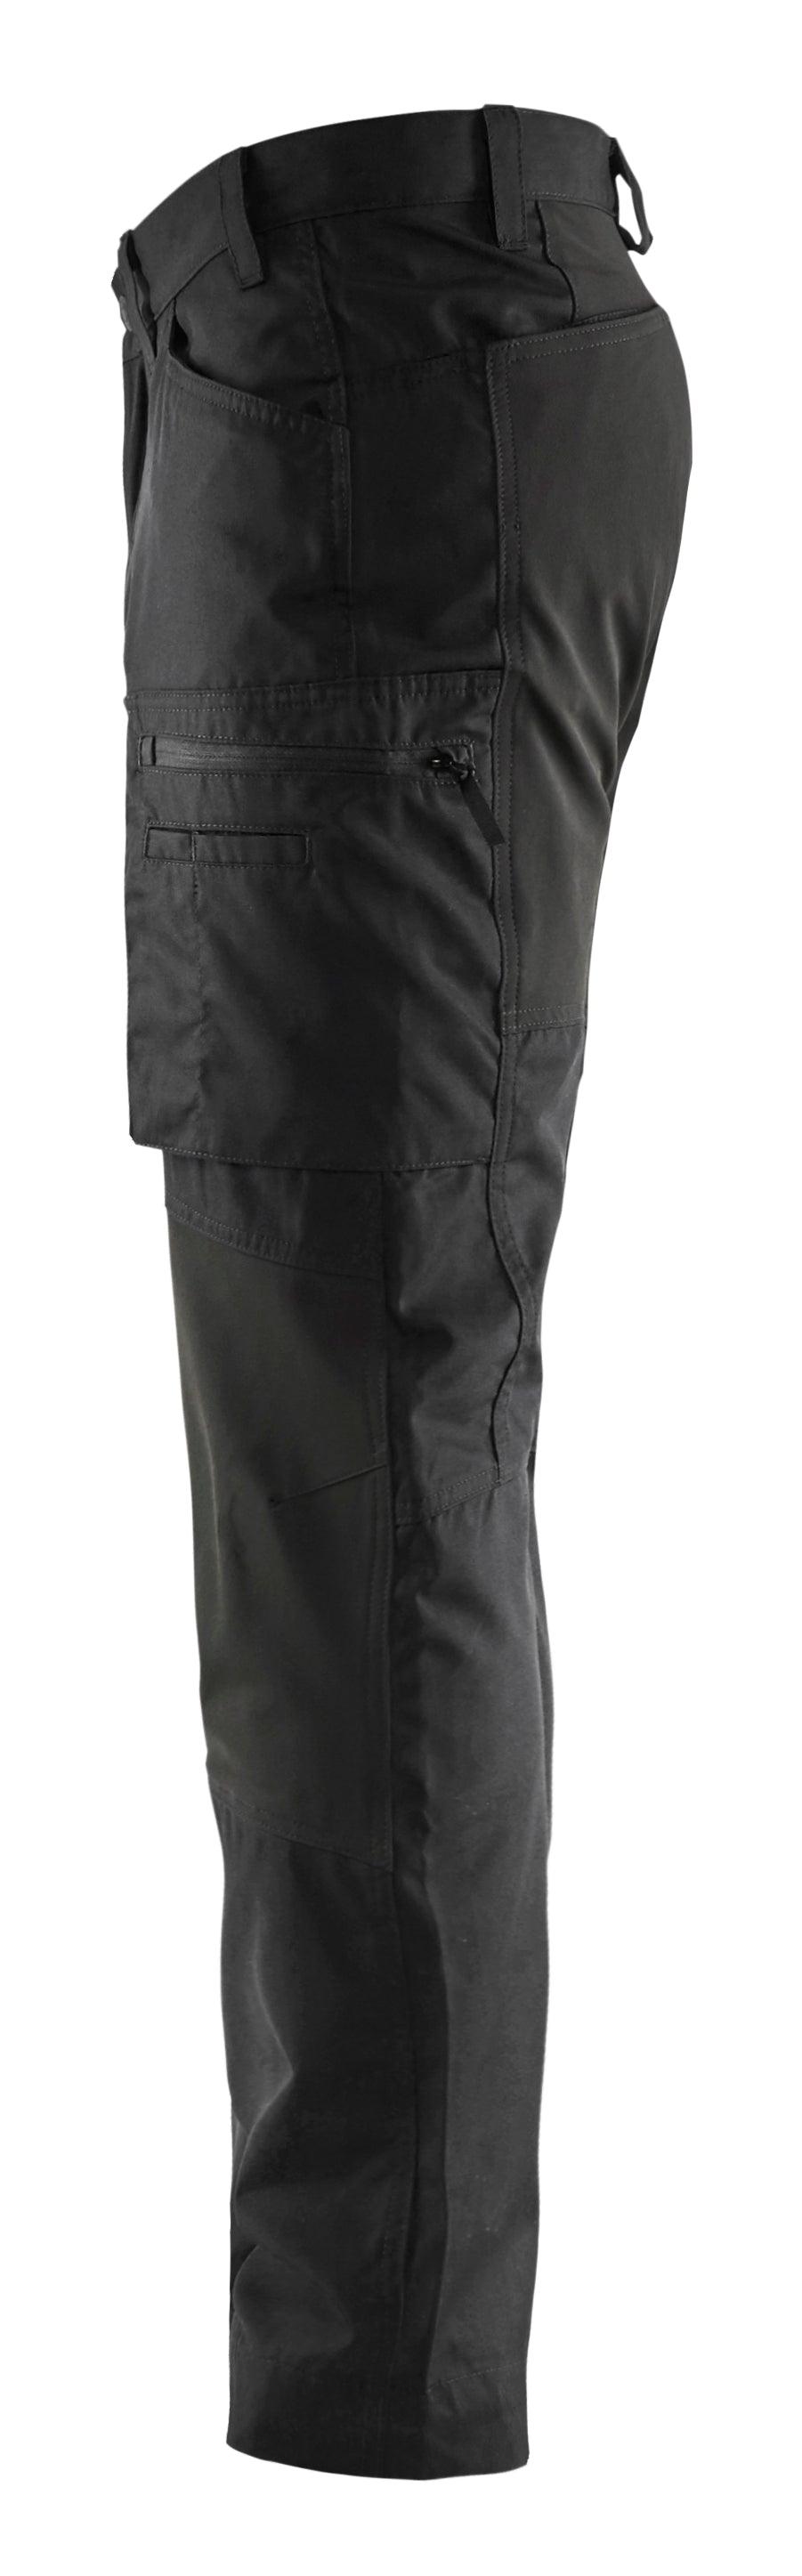 Blaklader 1655 5oz Service Pants with Stretch - Black - Trusted Gear Company LLC